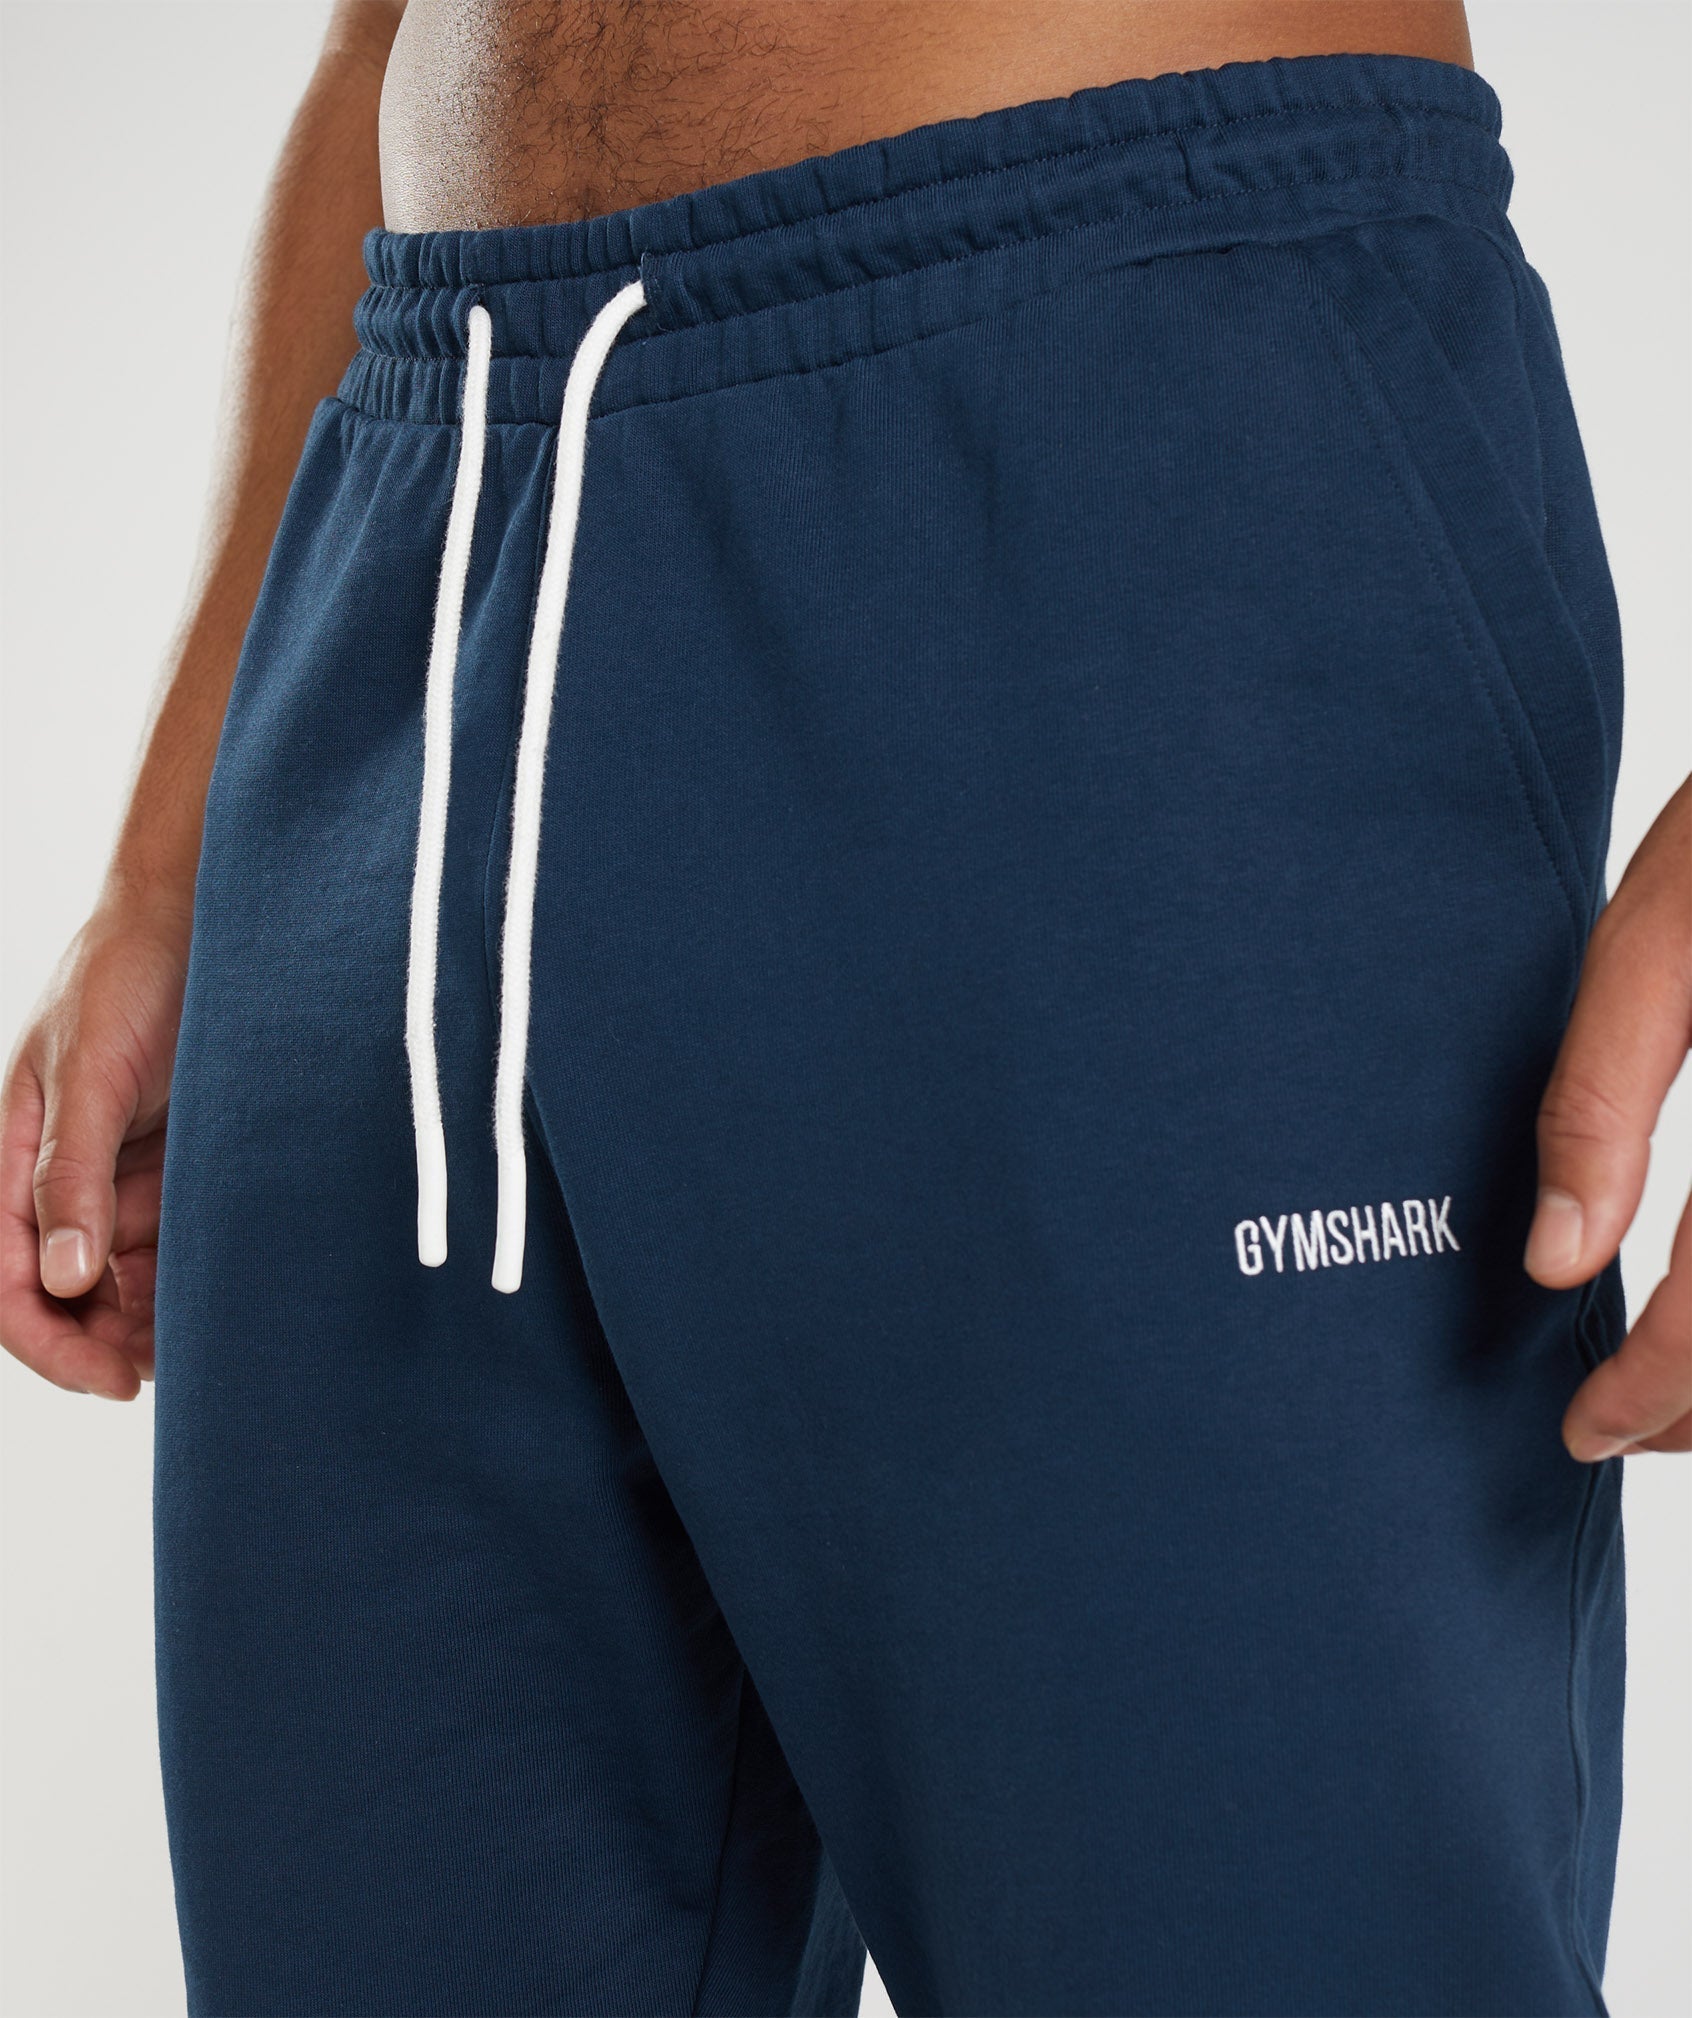 Rest Day Sweats Joggers in Navy - view 7